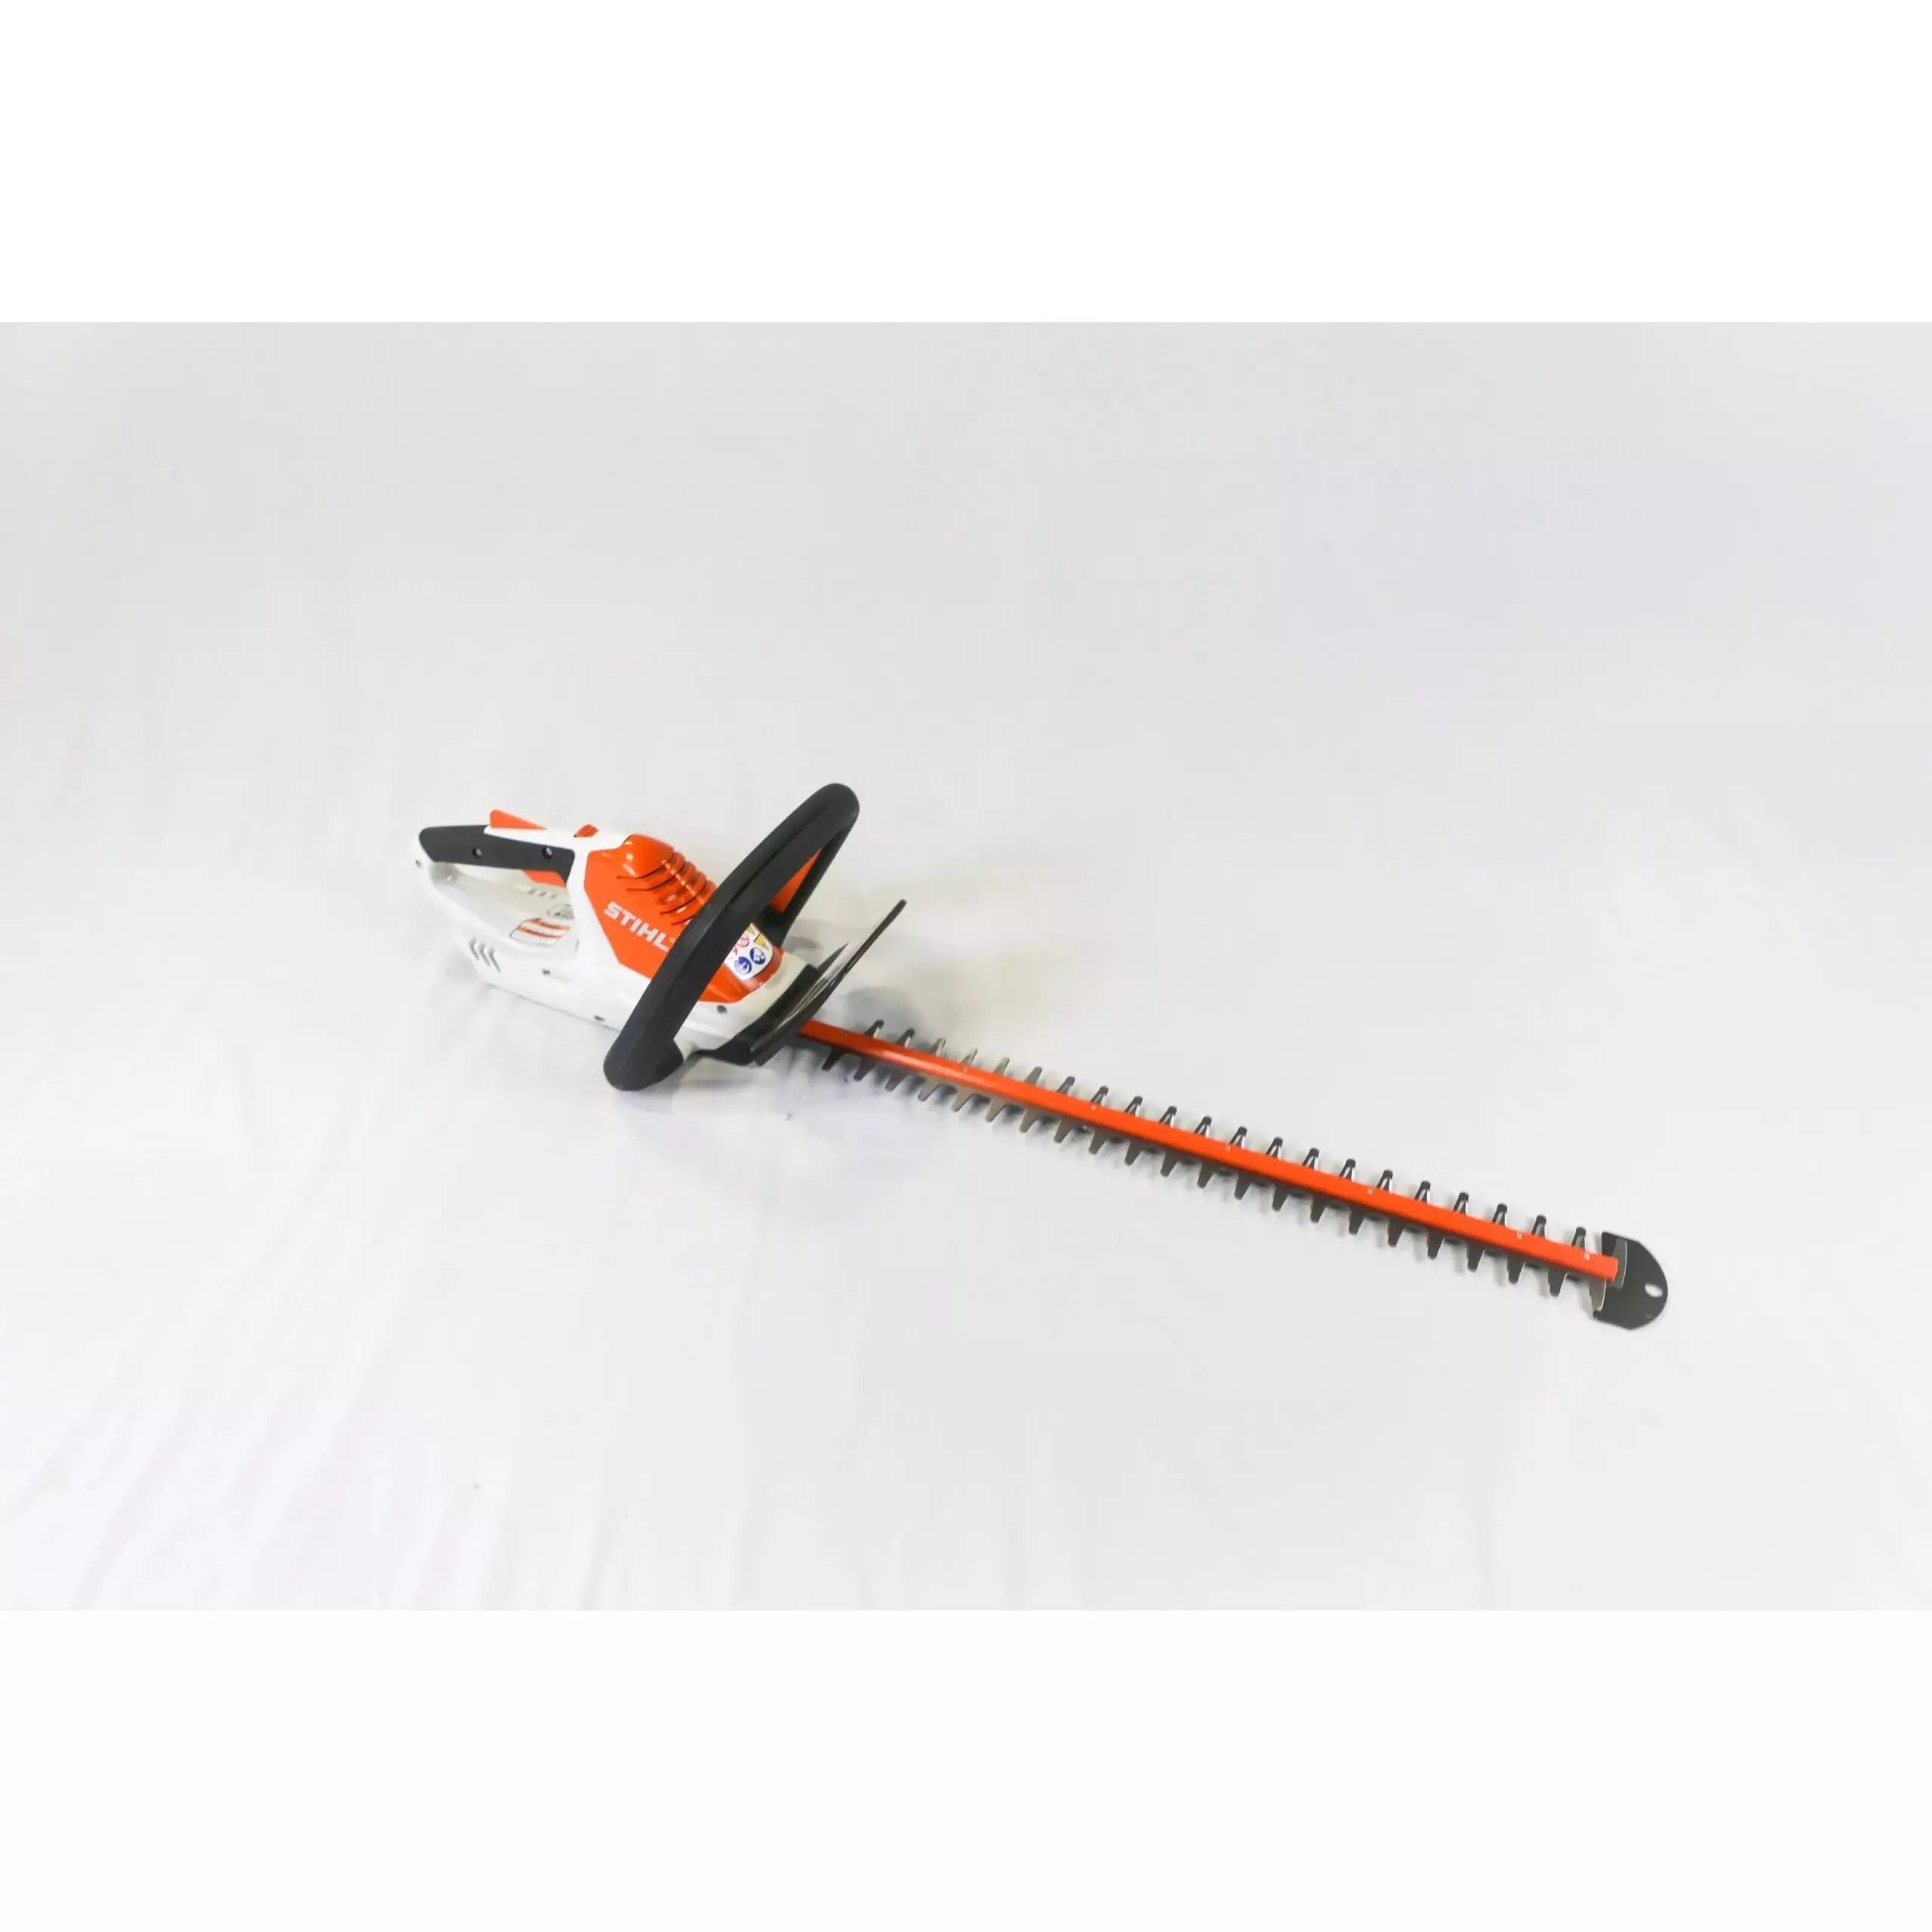 STIHL HSA 45 20 in. 18 V Battery Hedge Trimmer